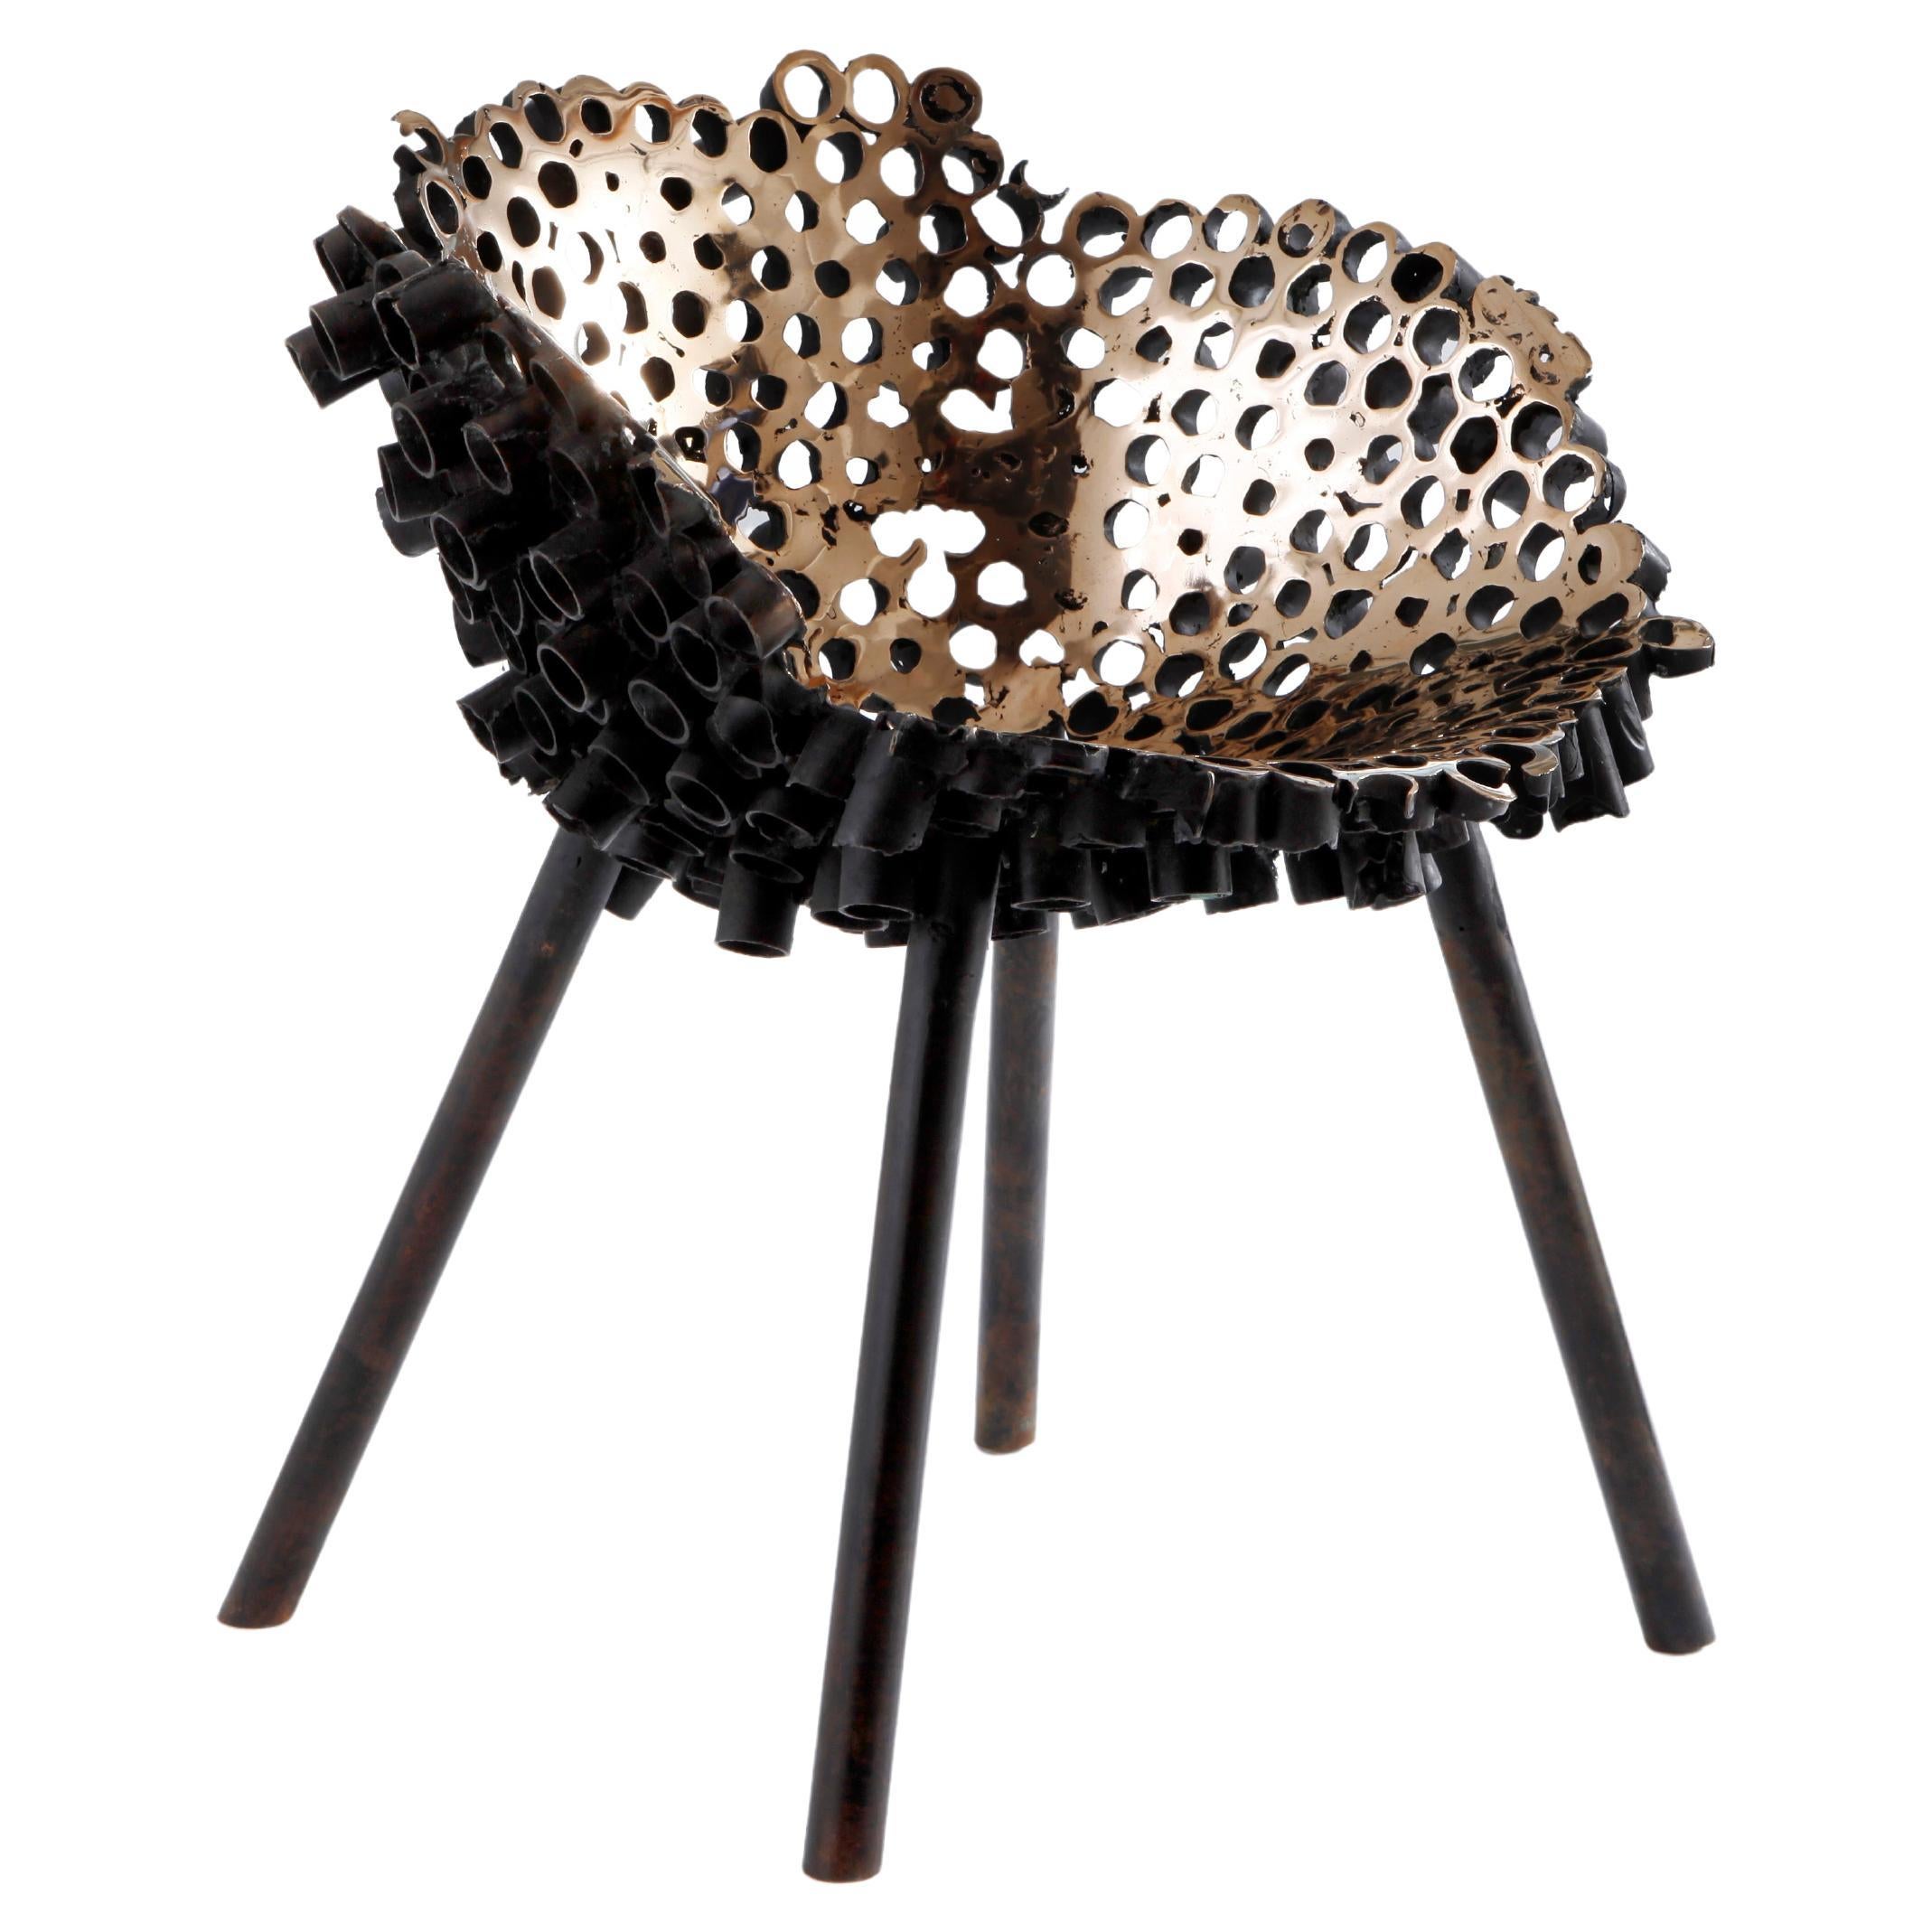 Meltdown Chair, Bronze #2 by Tom Price, Contemporary, Limited Edition